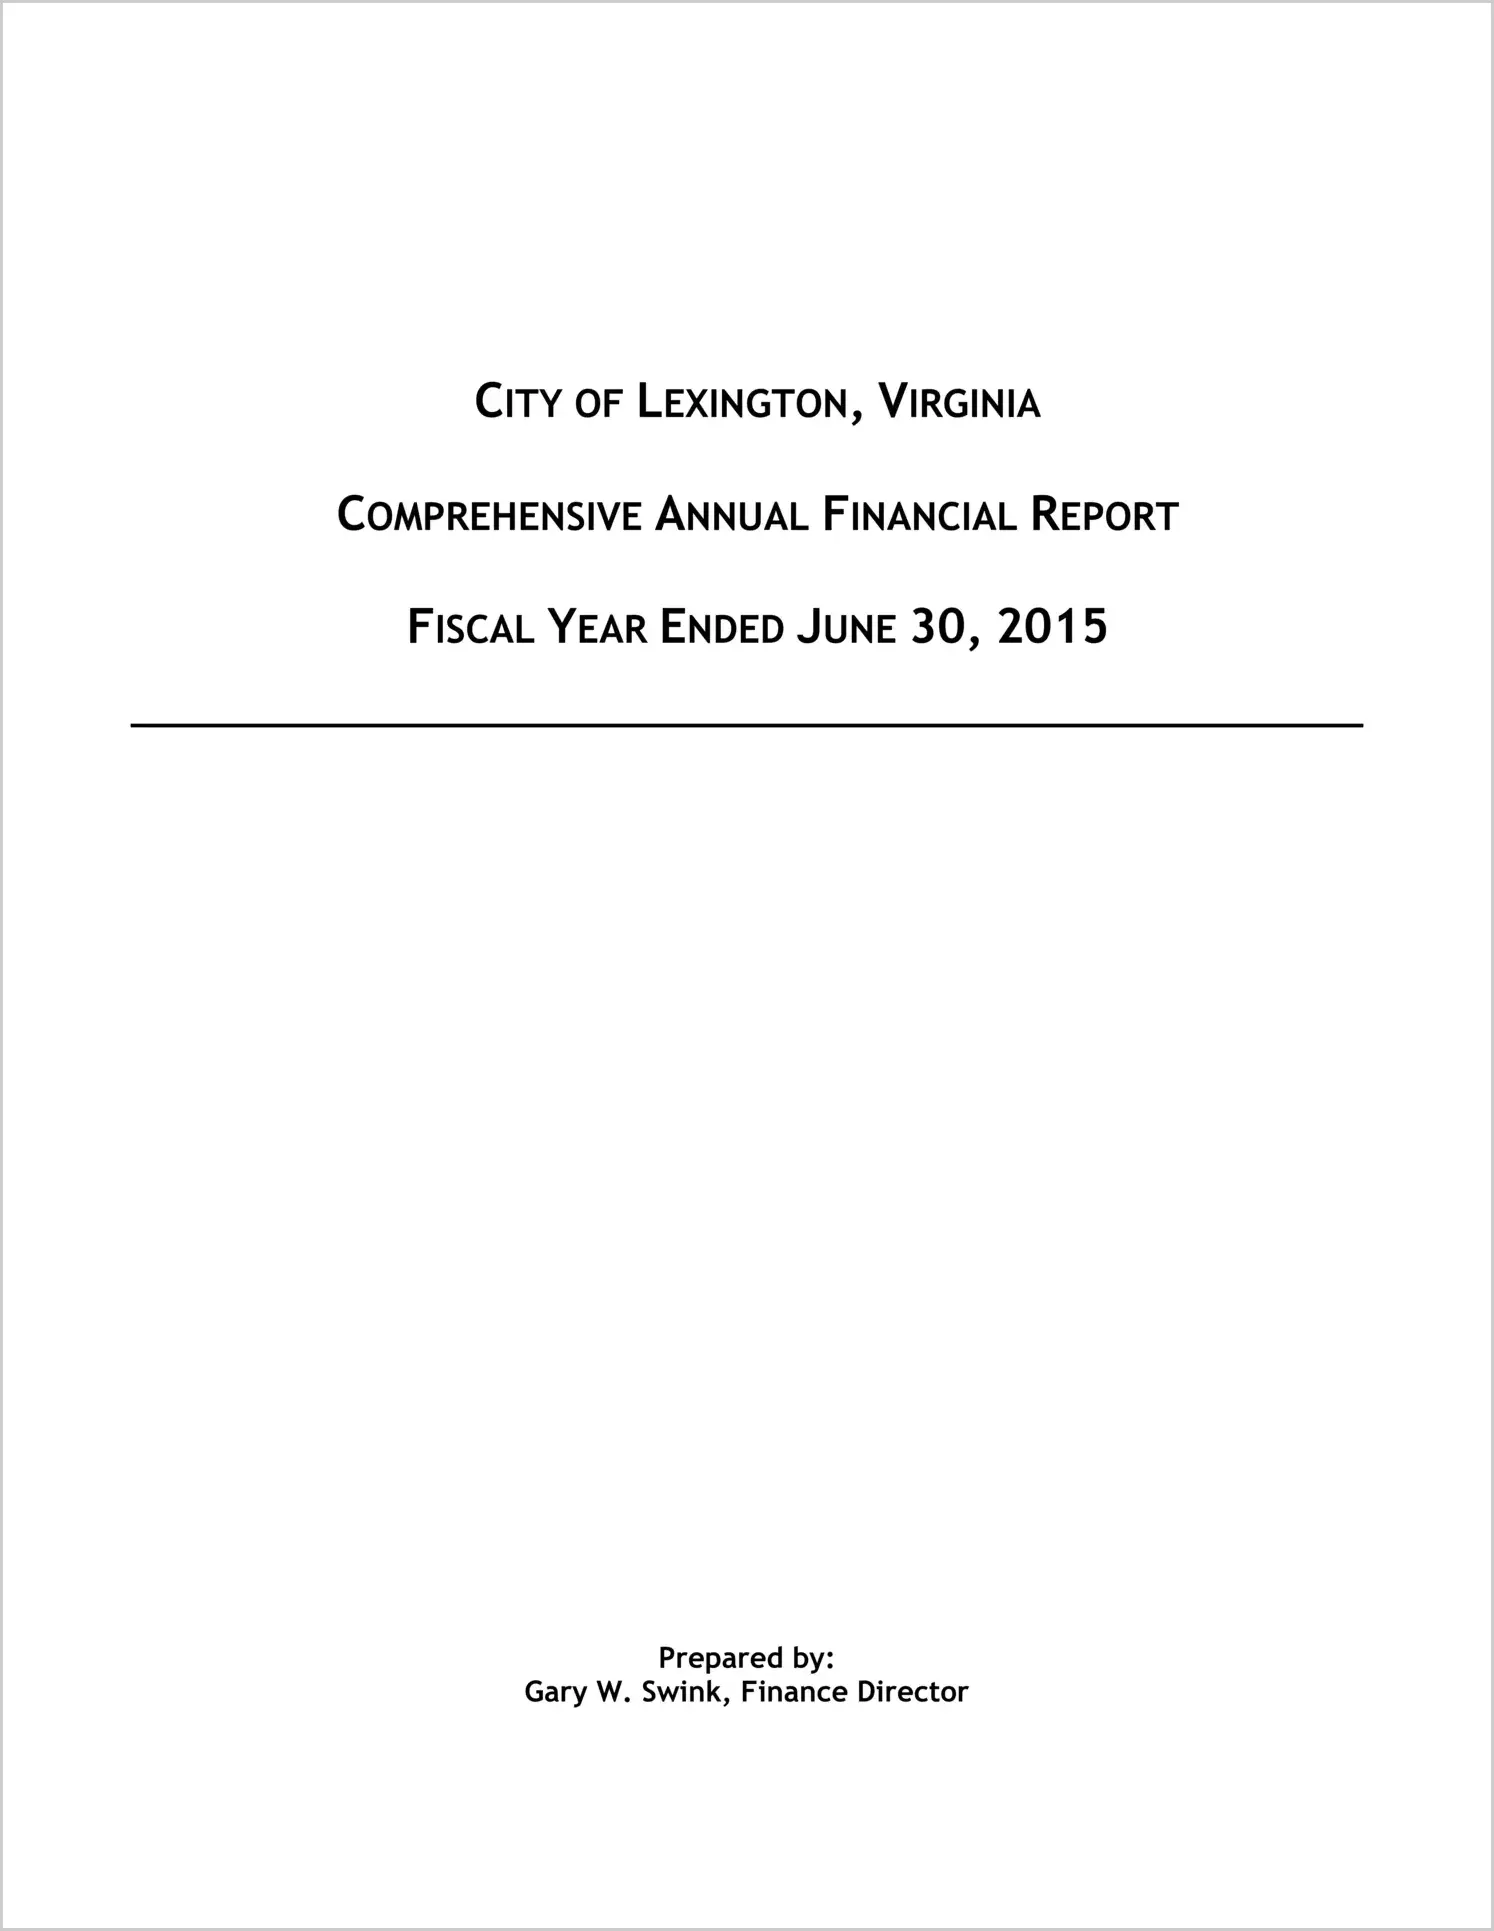 2015 Annual Financial Report for City of Lexington